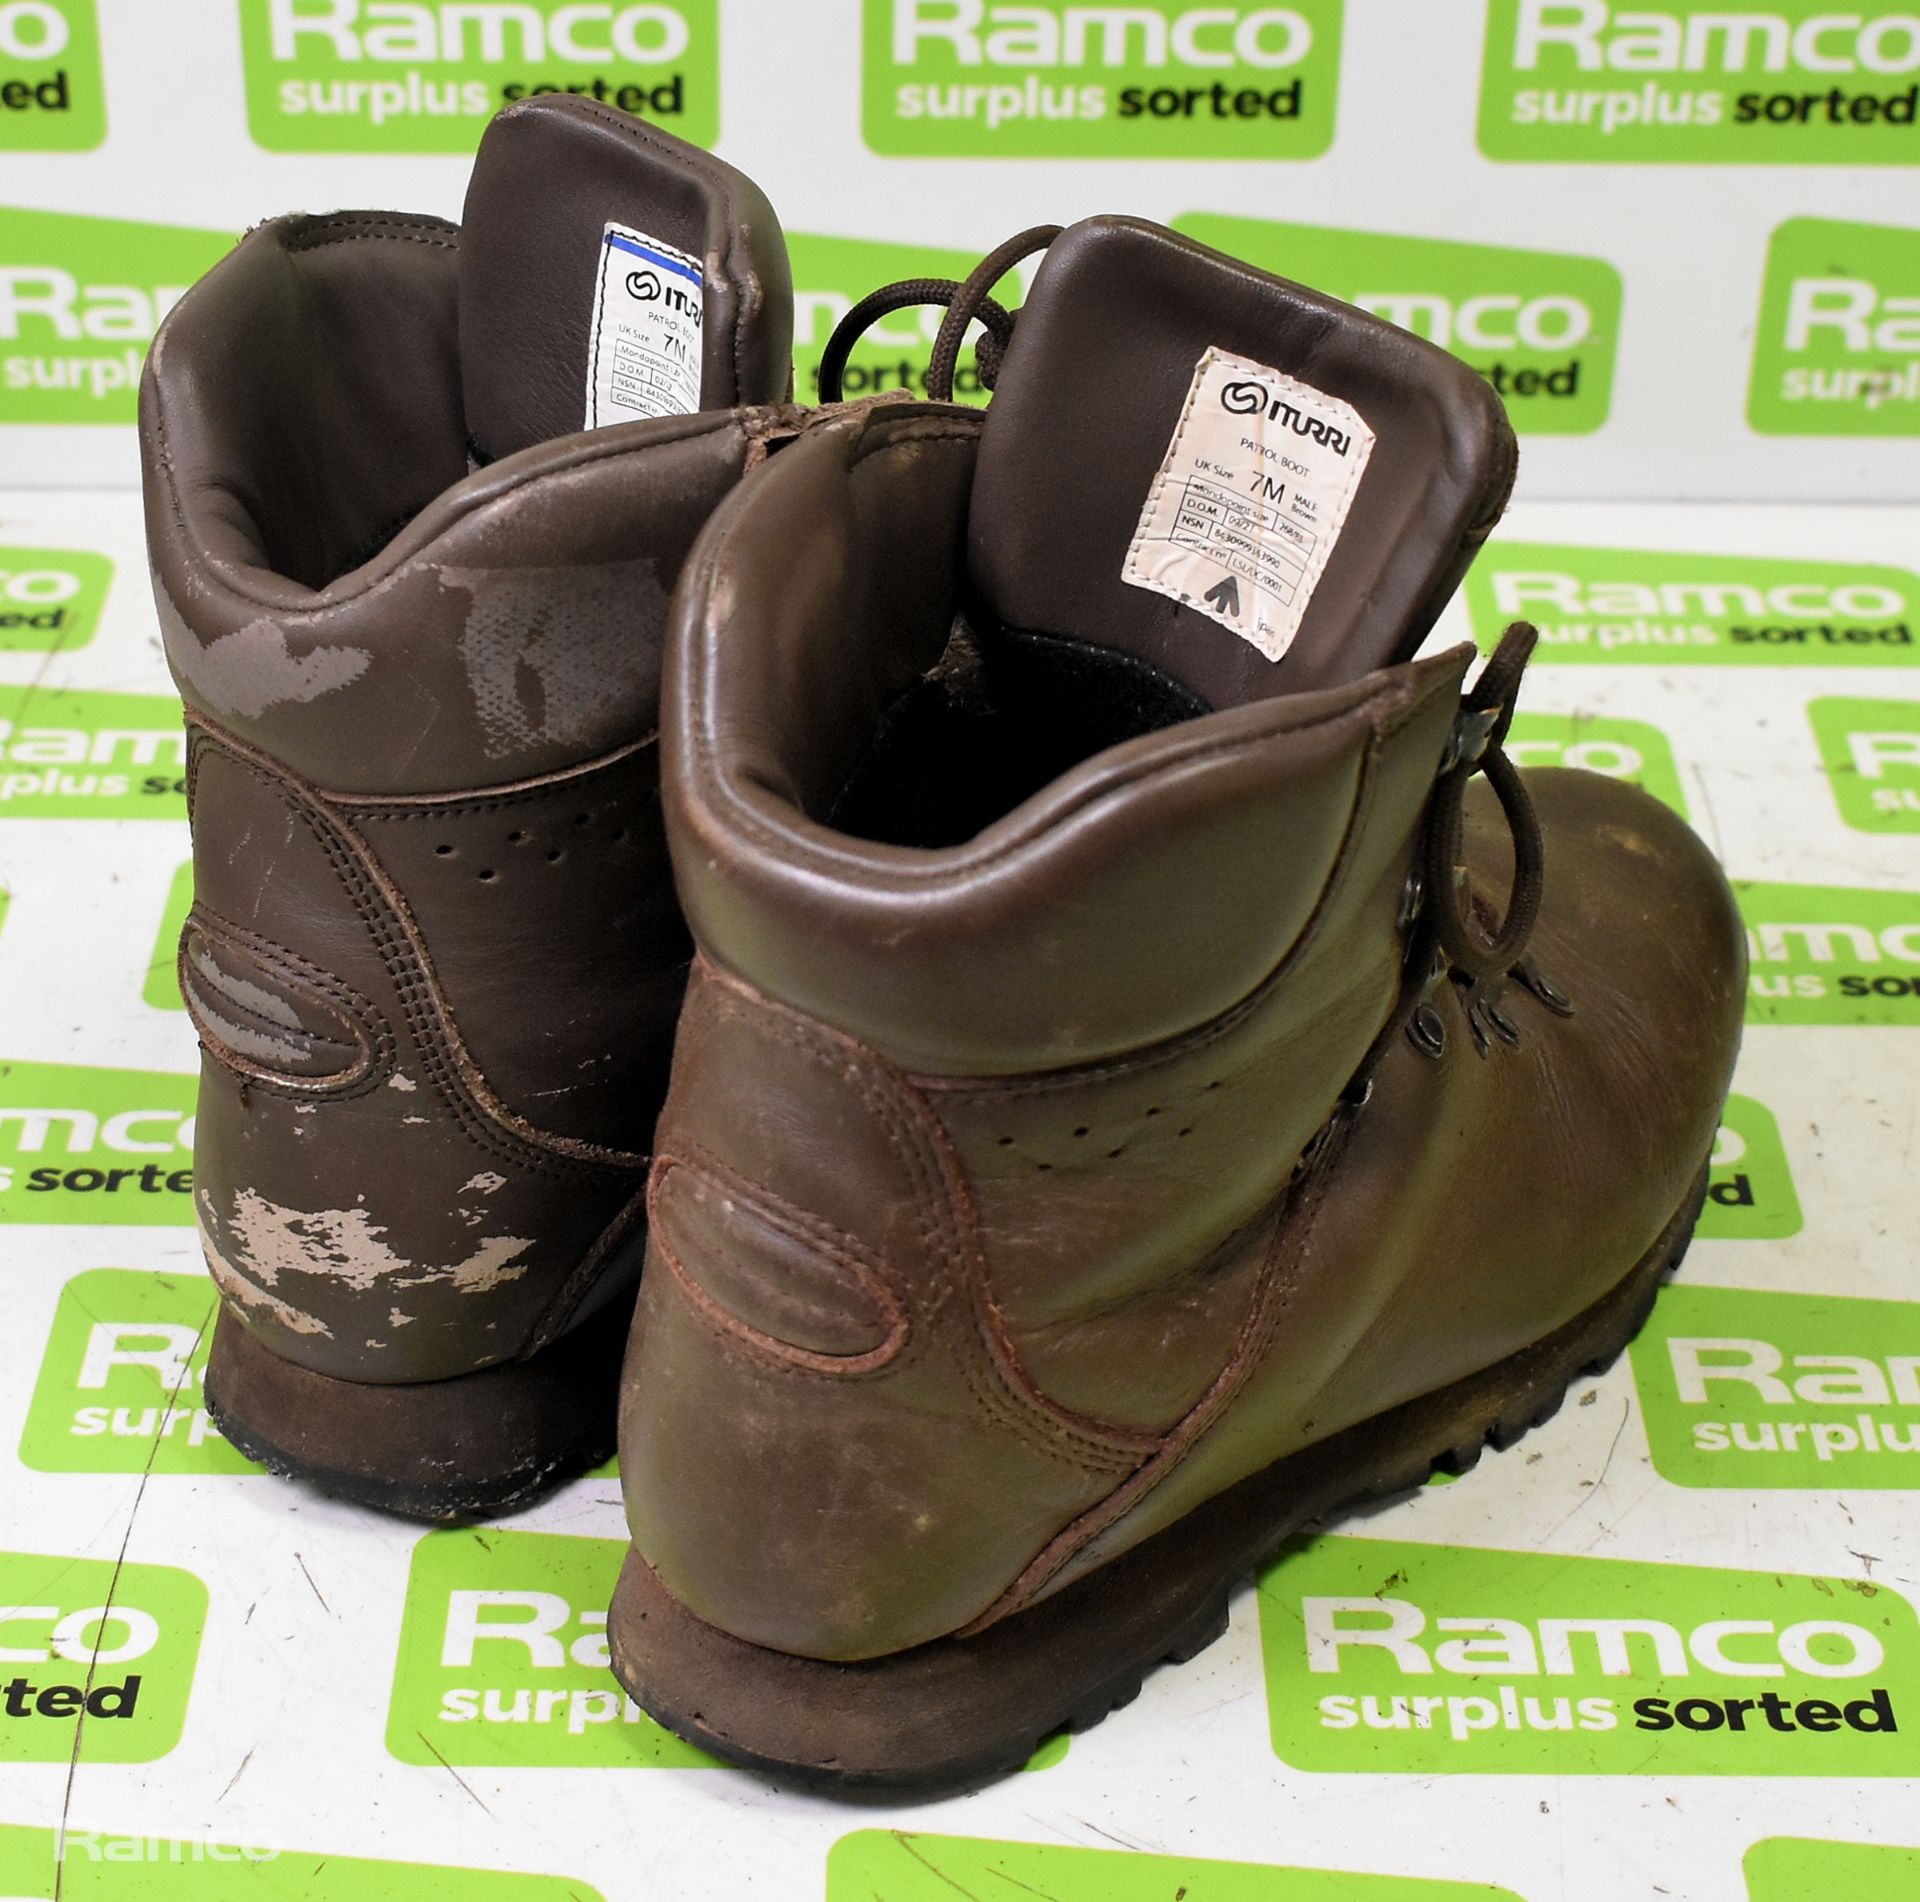 50x pairs of Various boots including Magnum, Iturri & YDS - mixed grades and sizes - Image 7 of 24